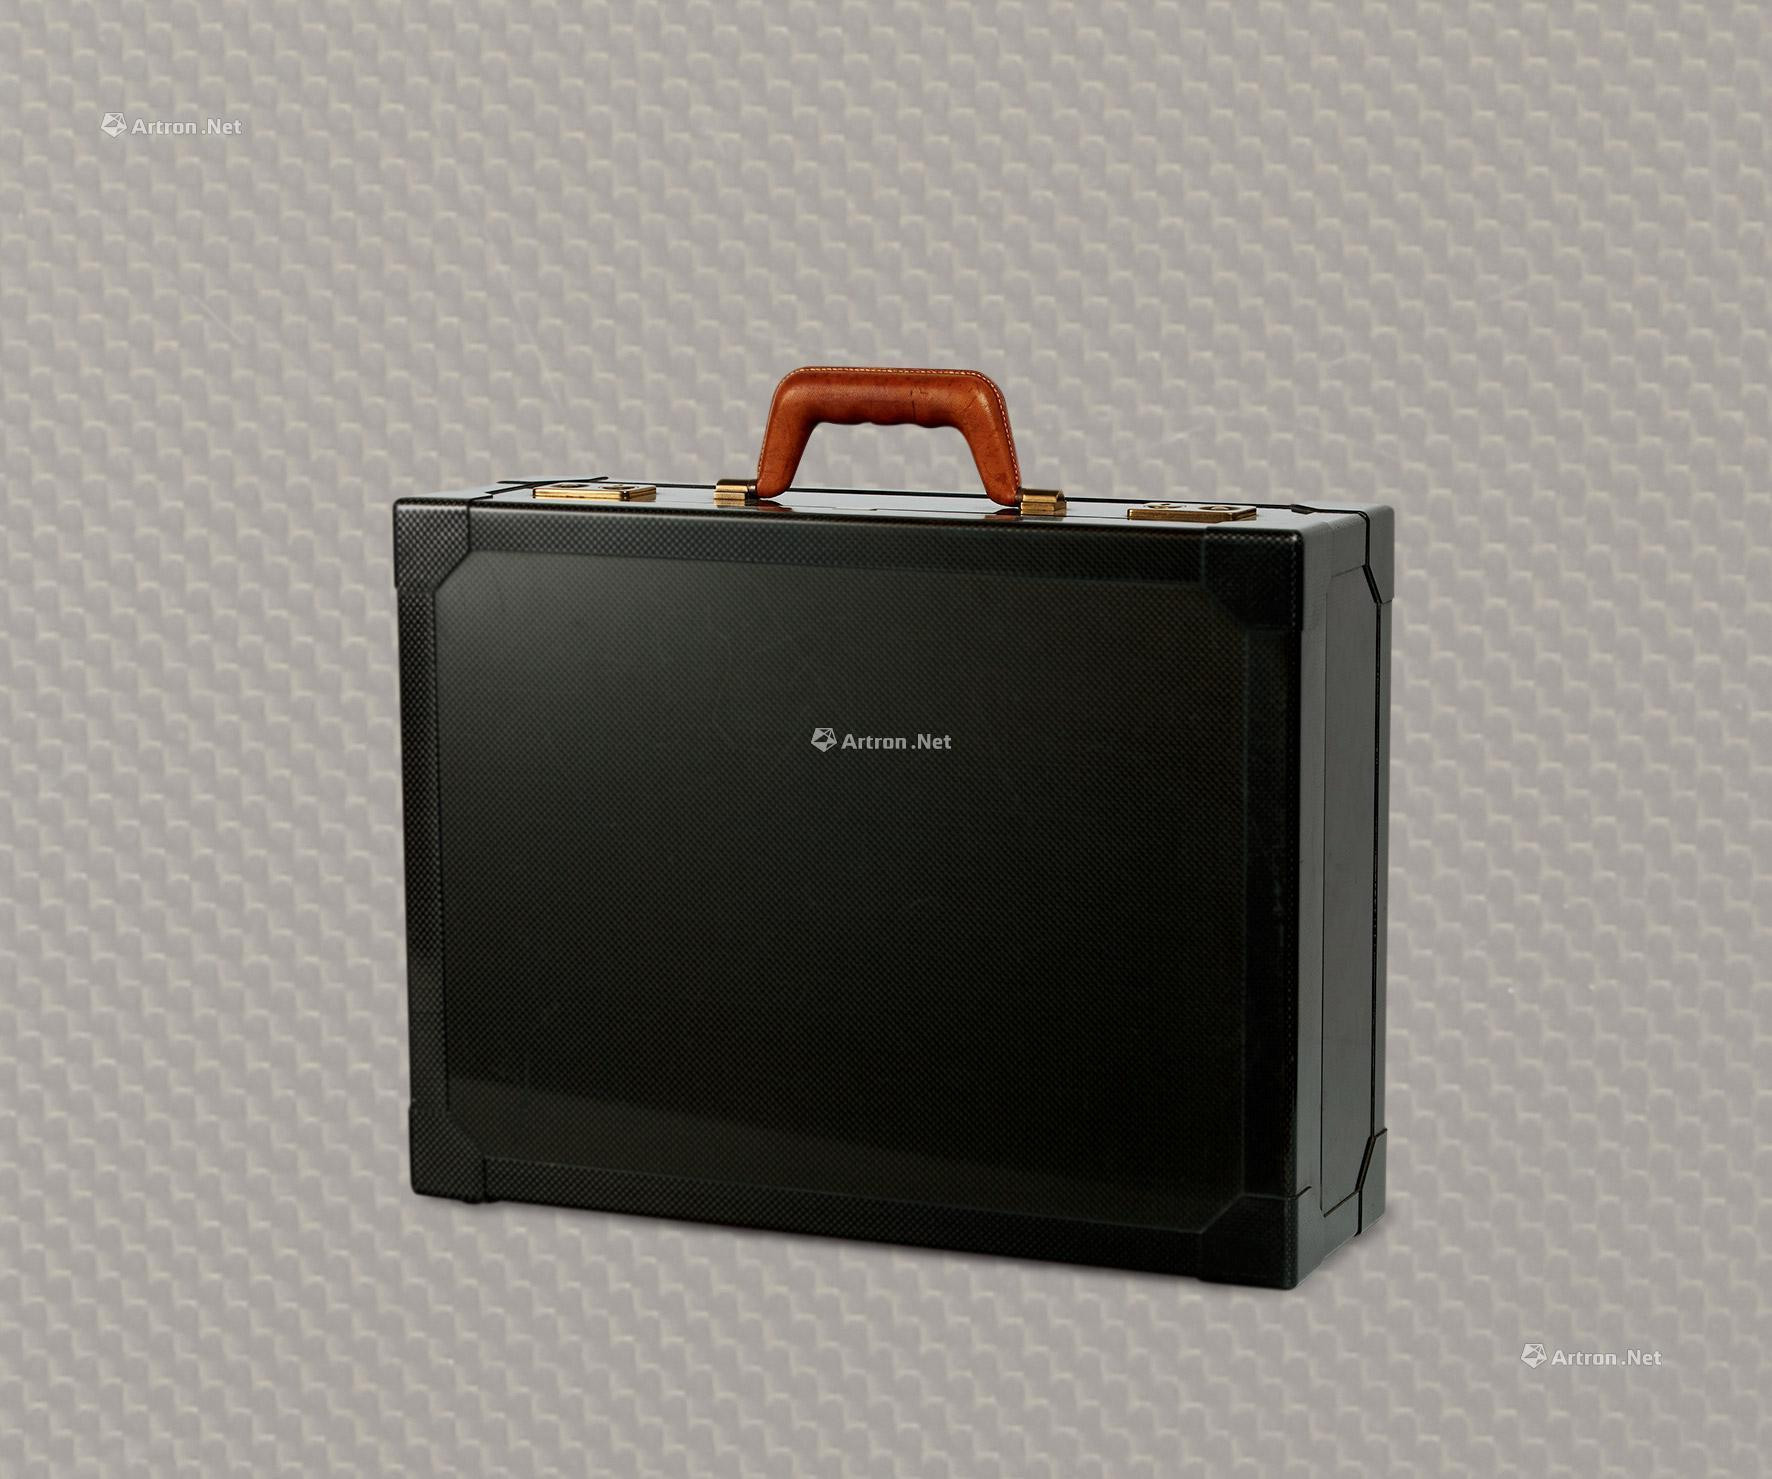 HERMES PARIS　A HERMES LEATHER SUITCASE WITH GOLD HARDWARE